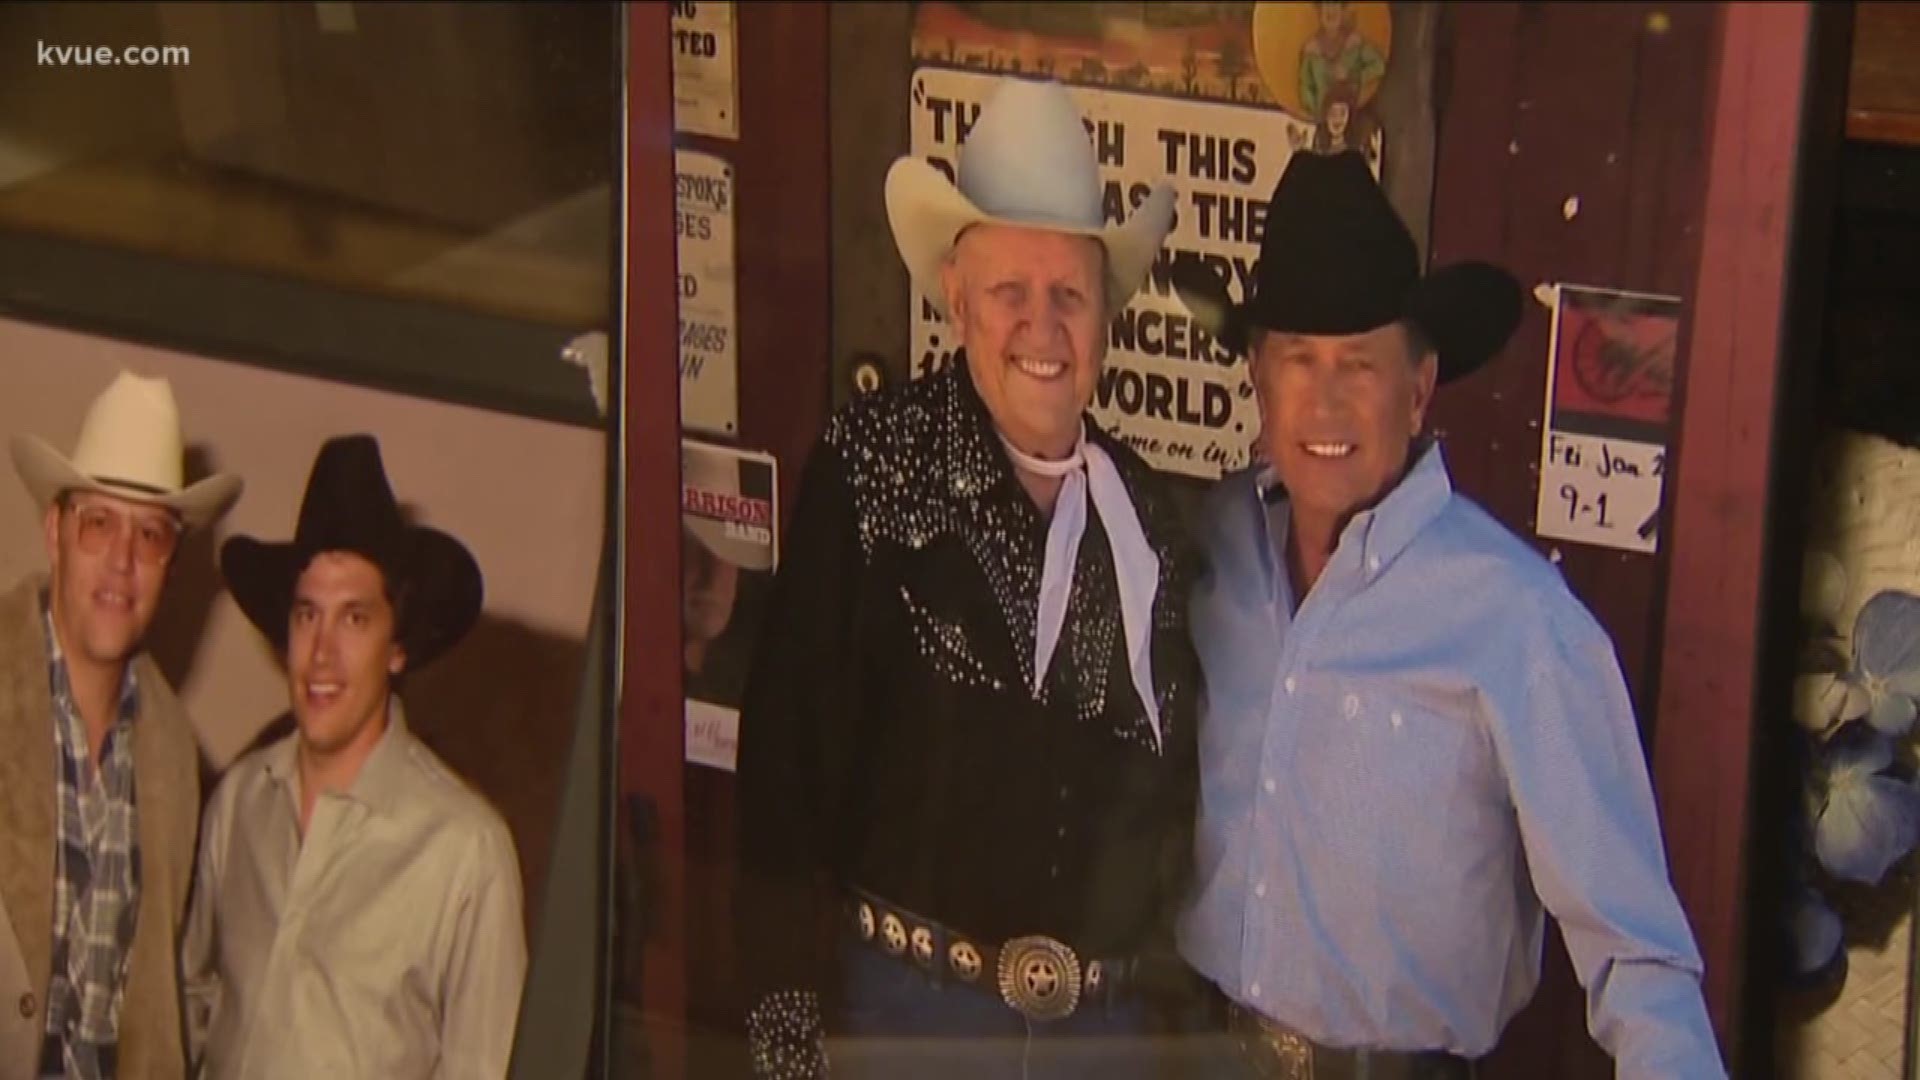 The Broken Spoke held an album release party for George Strait's new album, which features the iconic Austin honky-tonk on the cover.